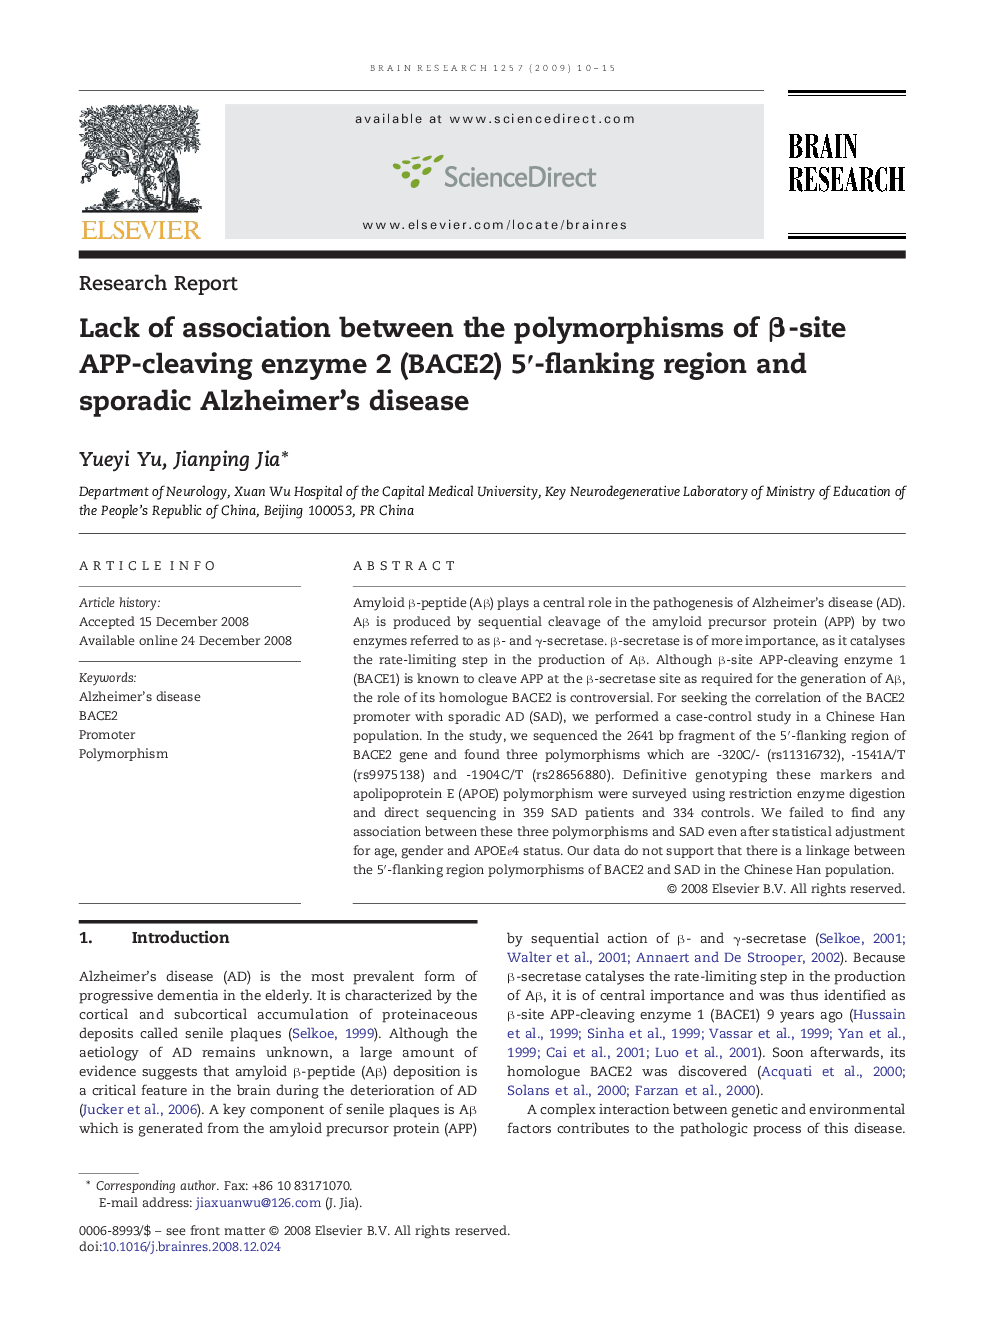 Lack of association between the polymorphisms of β-site APP-cleaving enzyme 2 (BACE2) 5′-flanking region and sporadic Alzheimer's disease